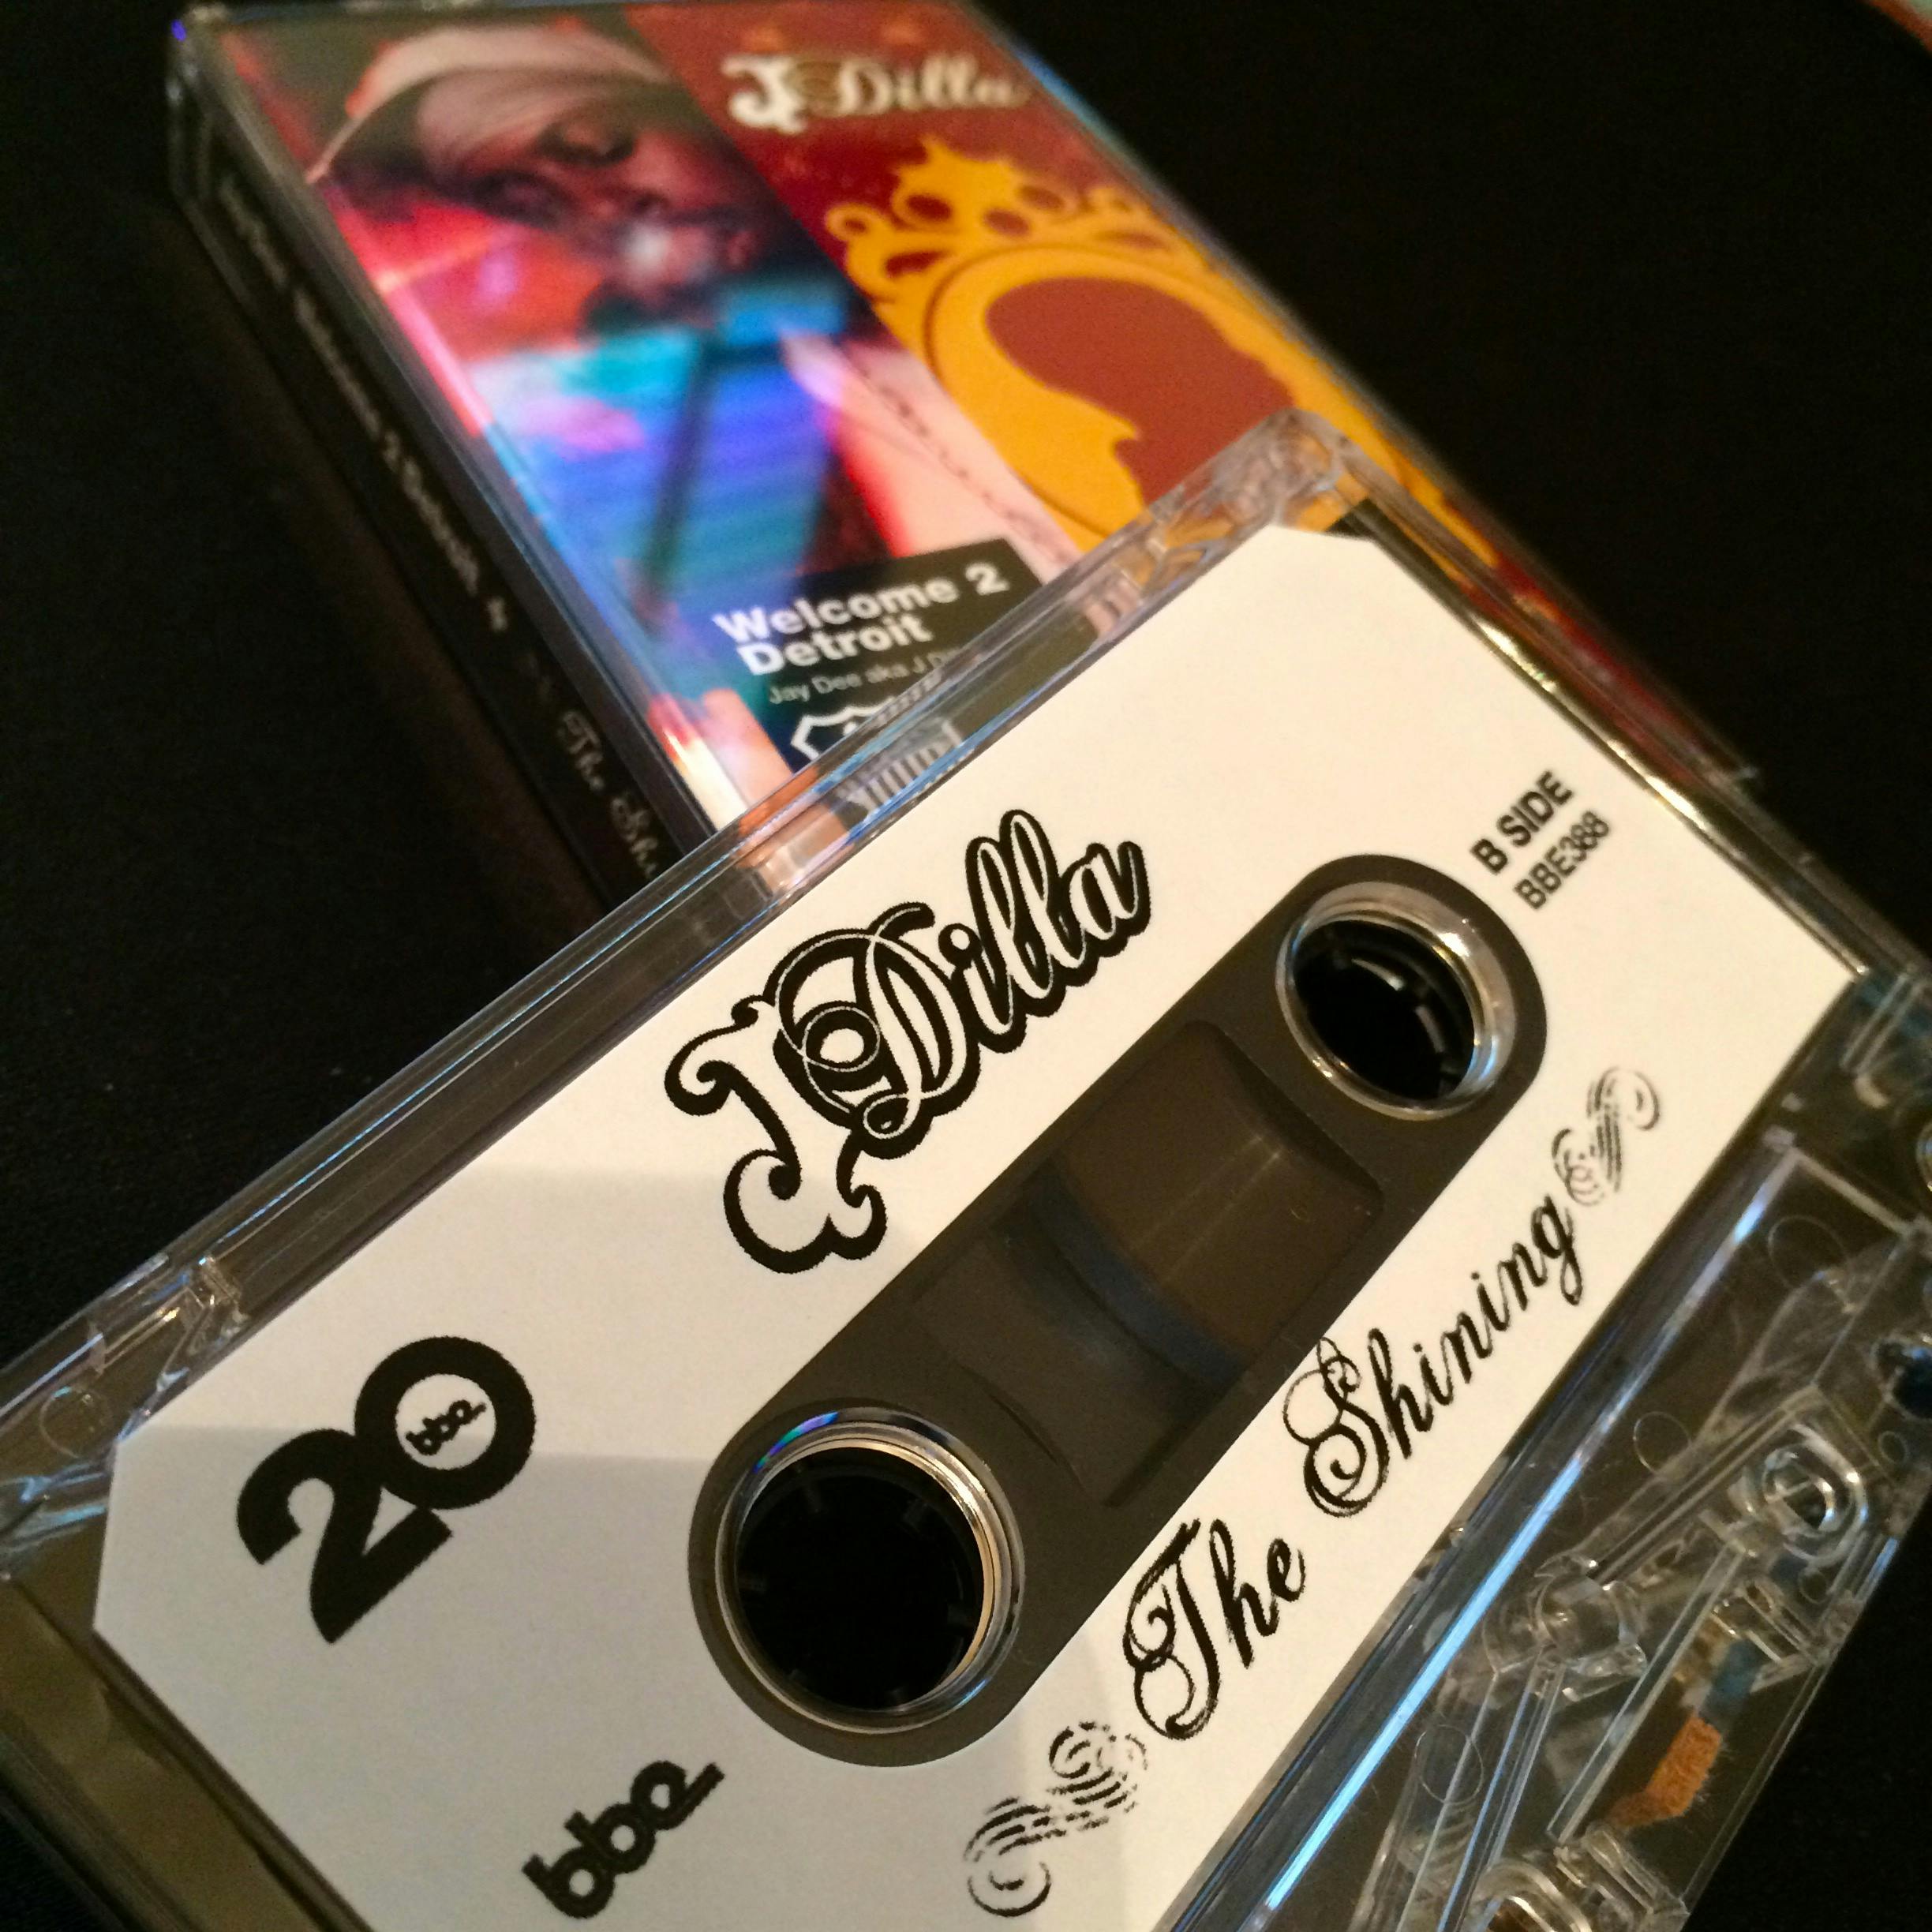 J Dilla: Welcome 2 Detroit & The Shining, exclusive tape version for Cassette Store Day